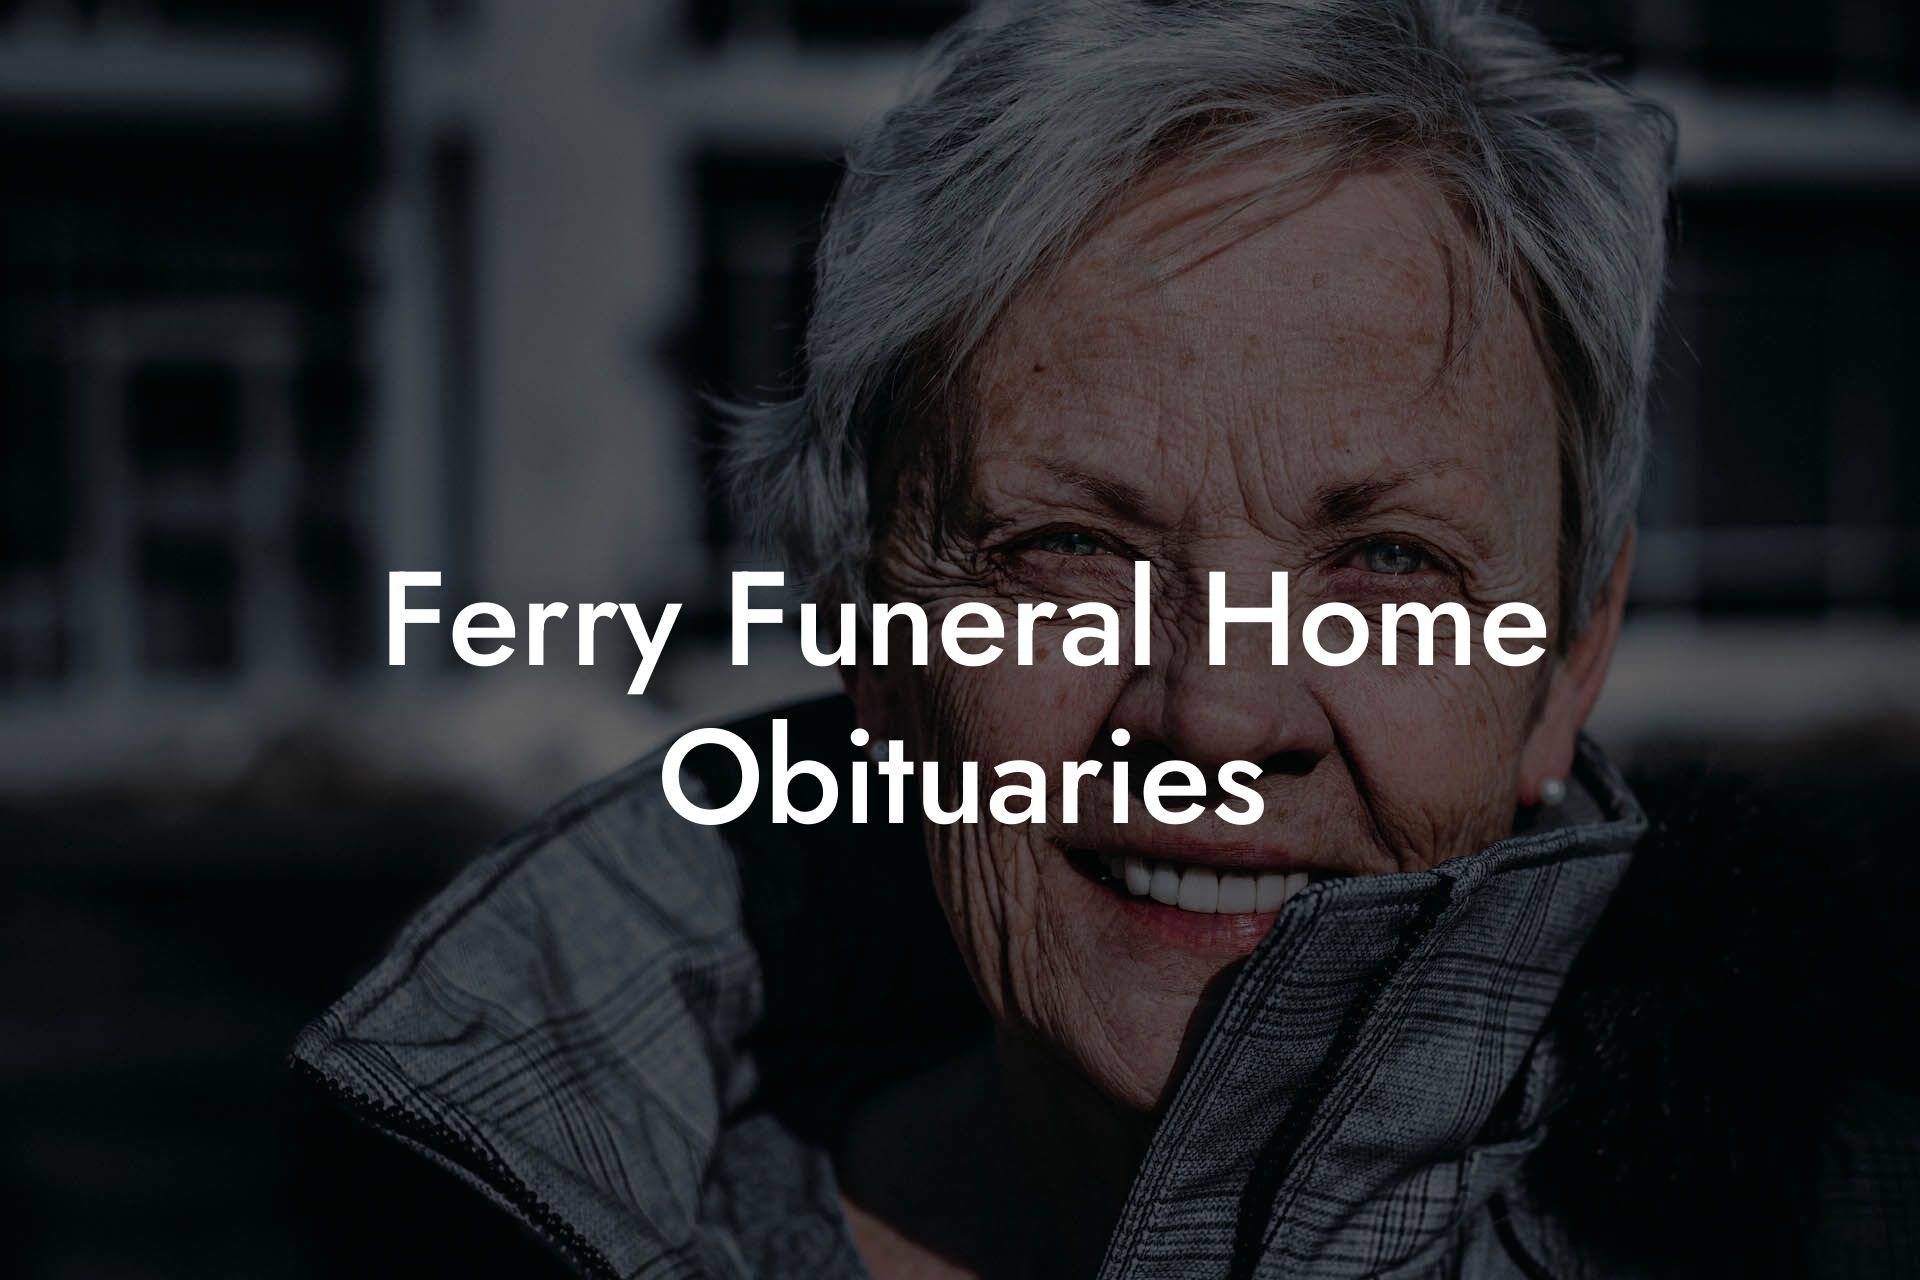 Ferry Funeral Home Obituaries